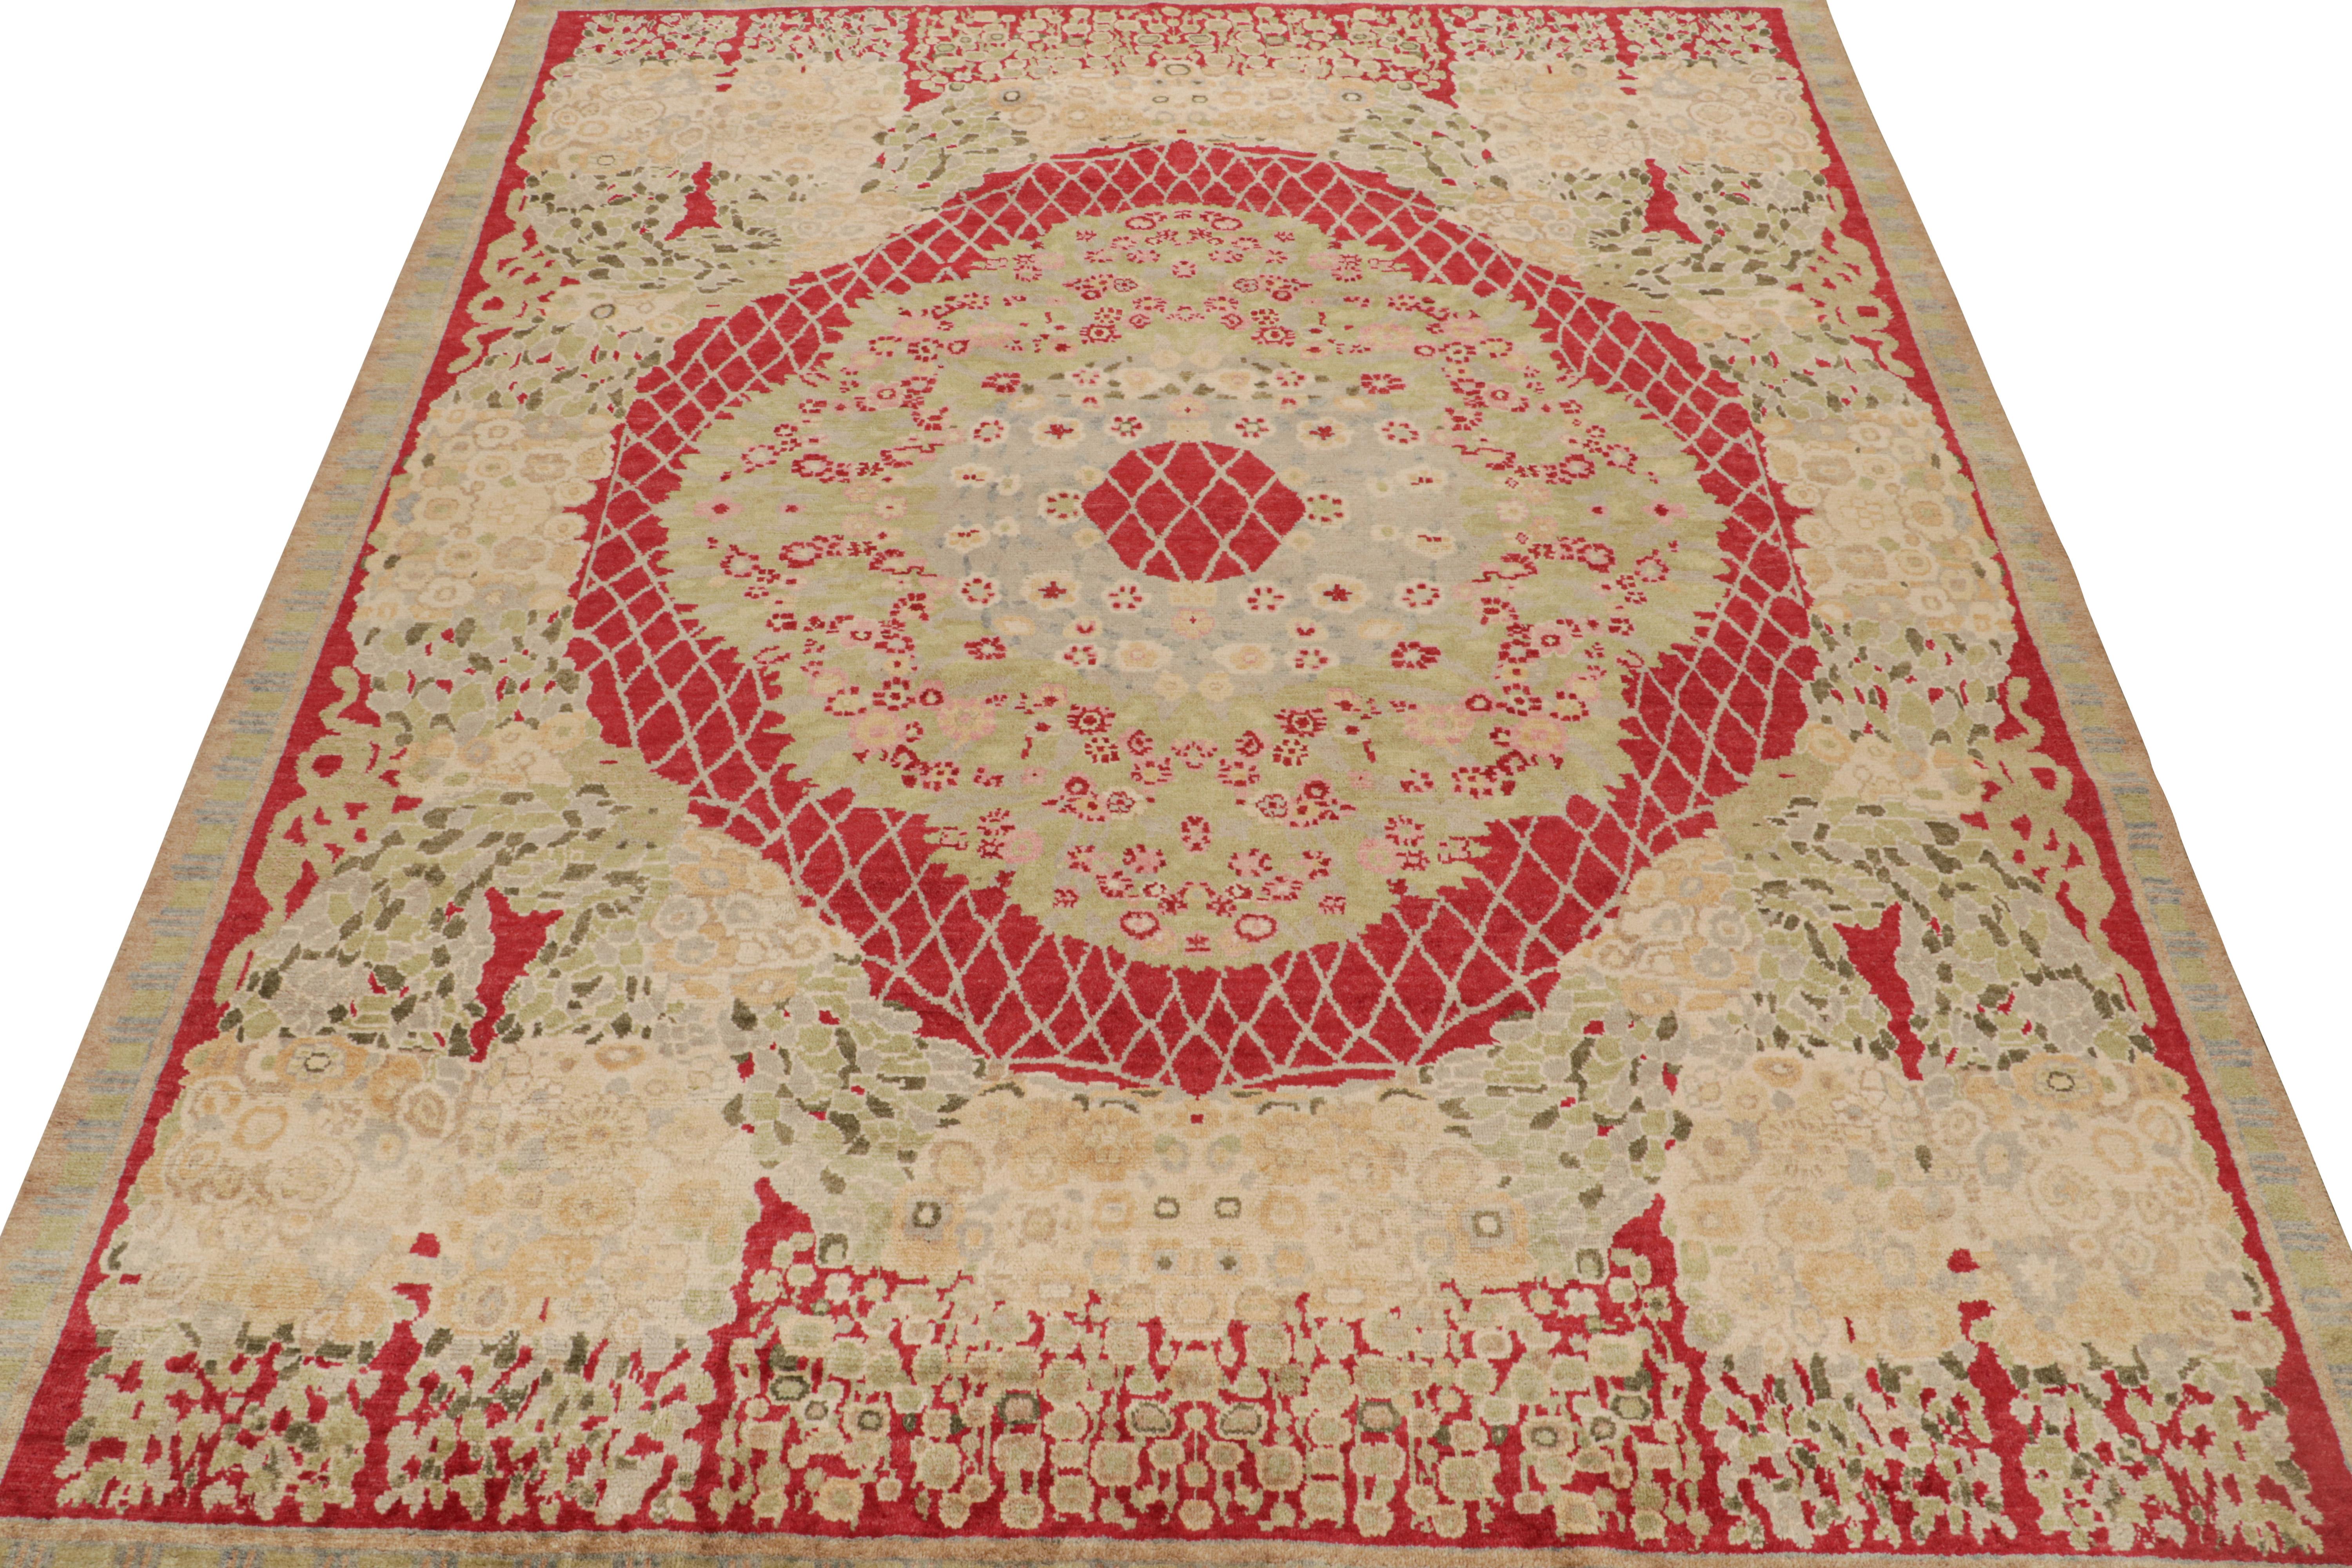 Art déco Rug & Kilim's French Style Art Deco Rug in Red, Green, Gold & Blue Patterns (en anglais seulement) en vente